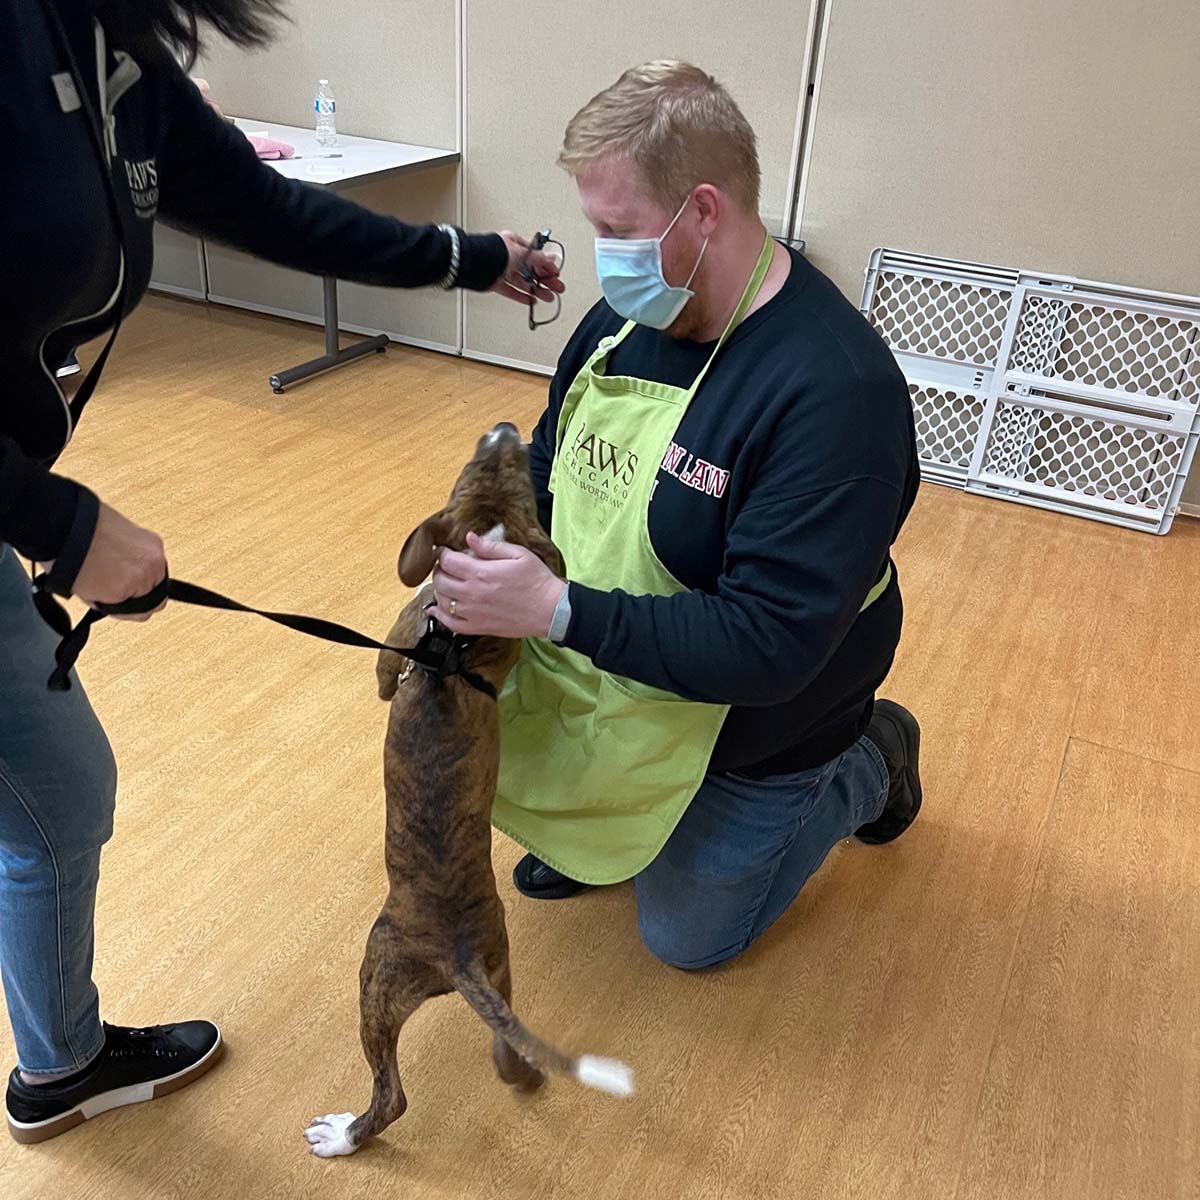 Will Turner, wearing a blue mask and a light green PAWS apron, kneels on the floor with a happy puppy while a PAWS staffer holds the leash and Will's glasses